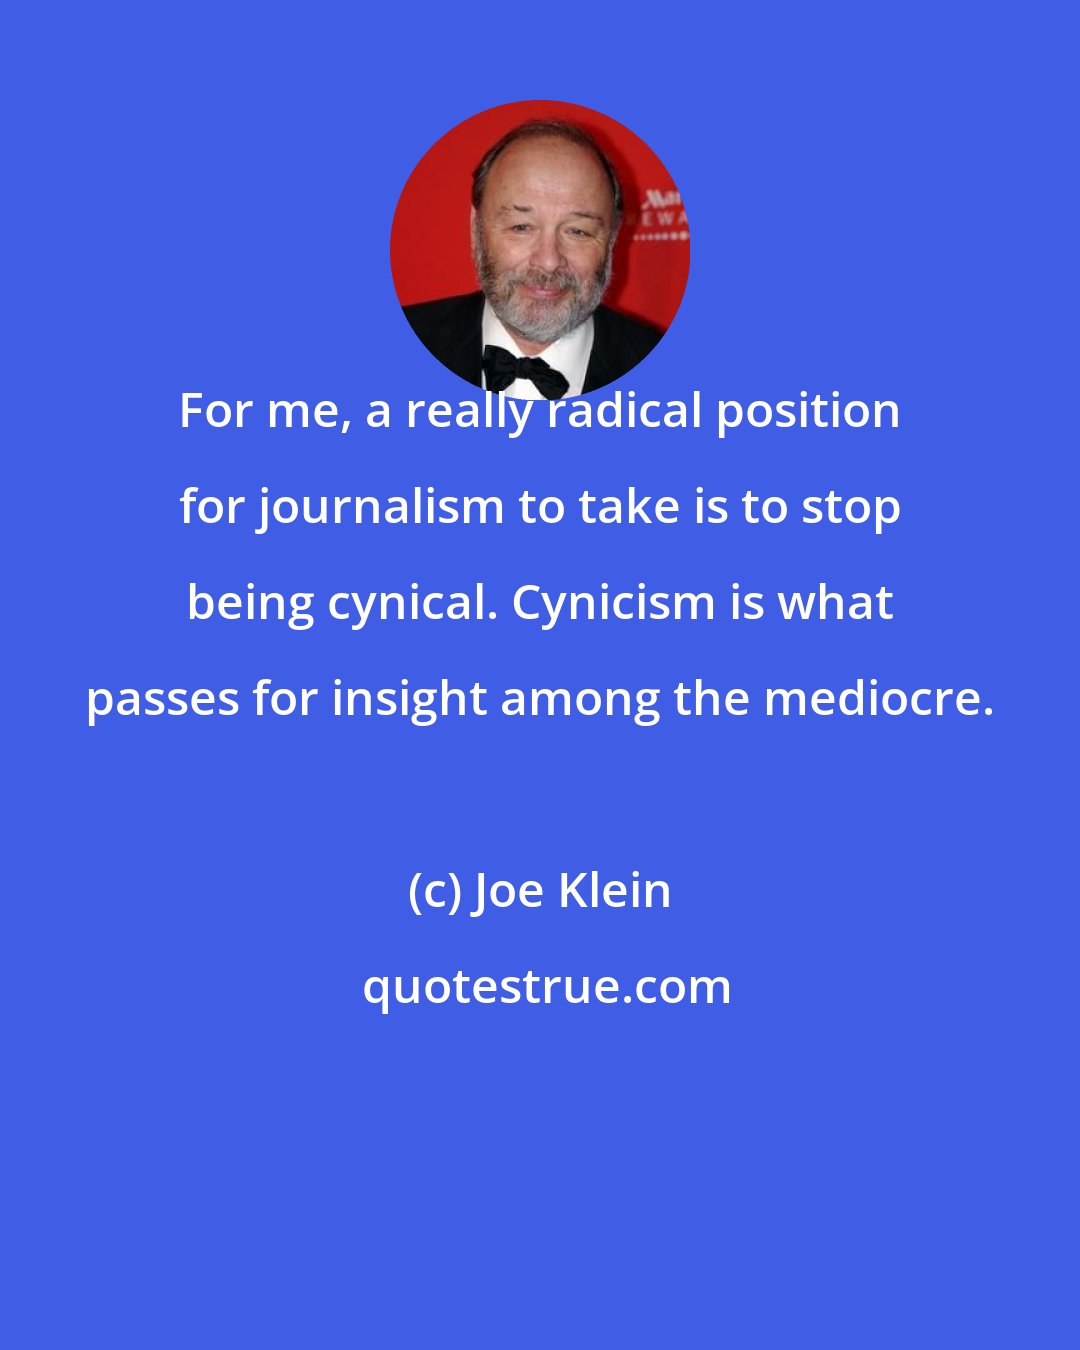 Joe Klein: For me, a really radical position for journalism to take is to stop being cynical. Cynicism is what passes for insight among the mediocre.